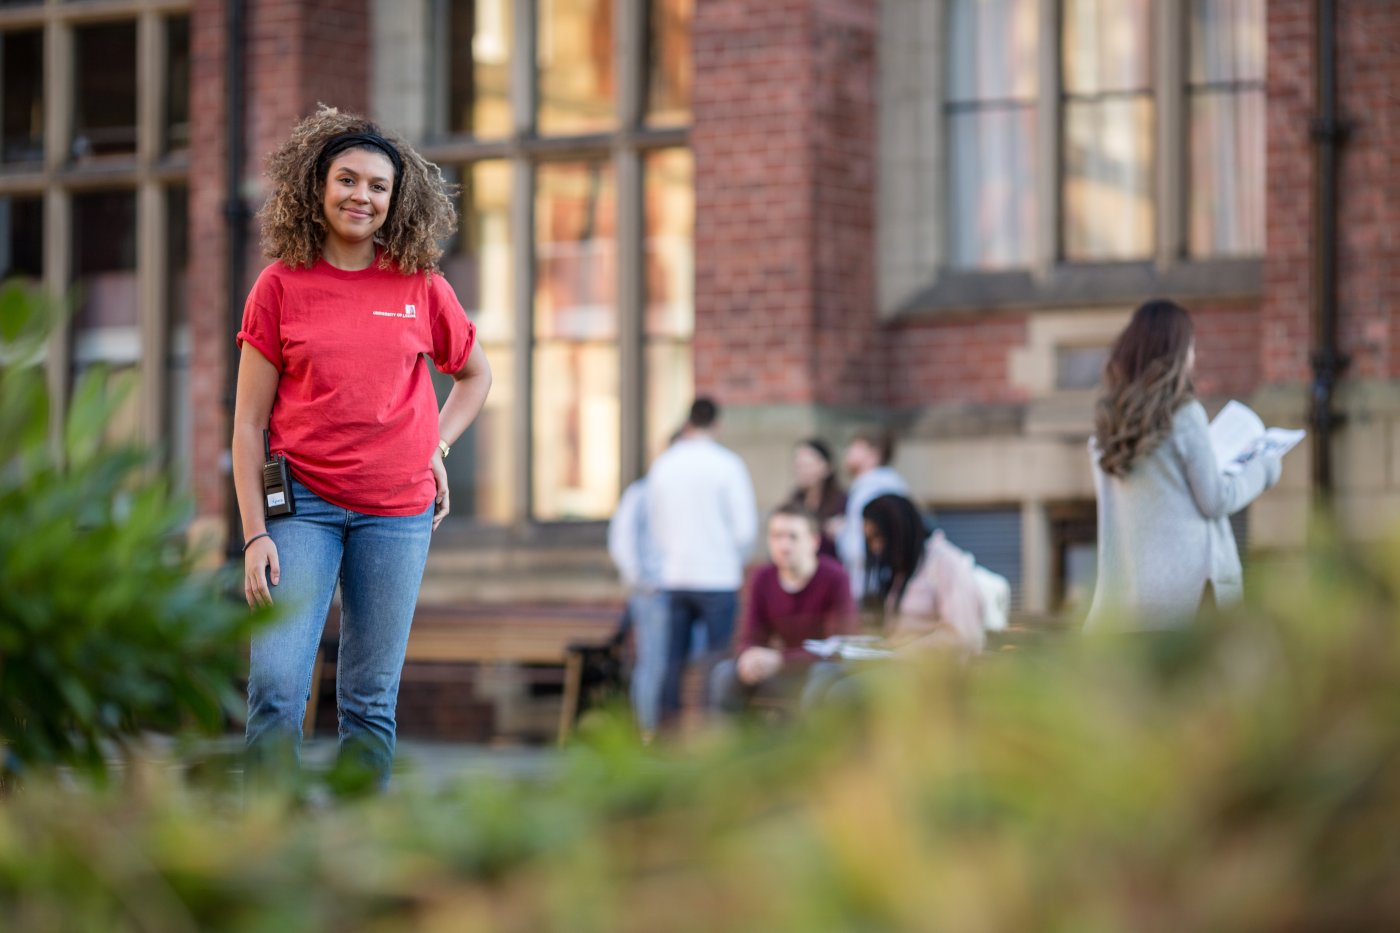 Female student ambassador smiling in a courtyard on campus